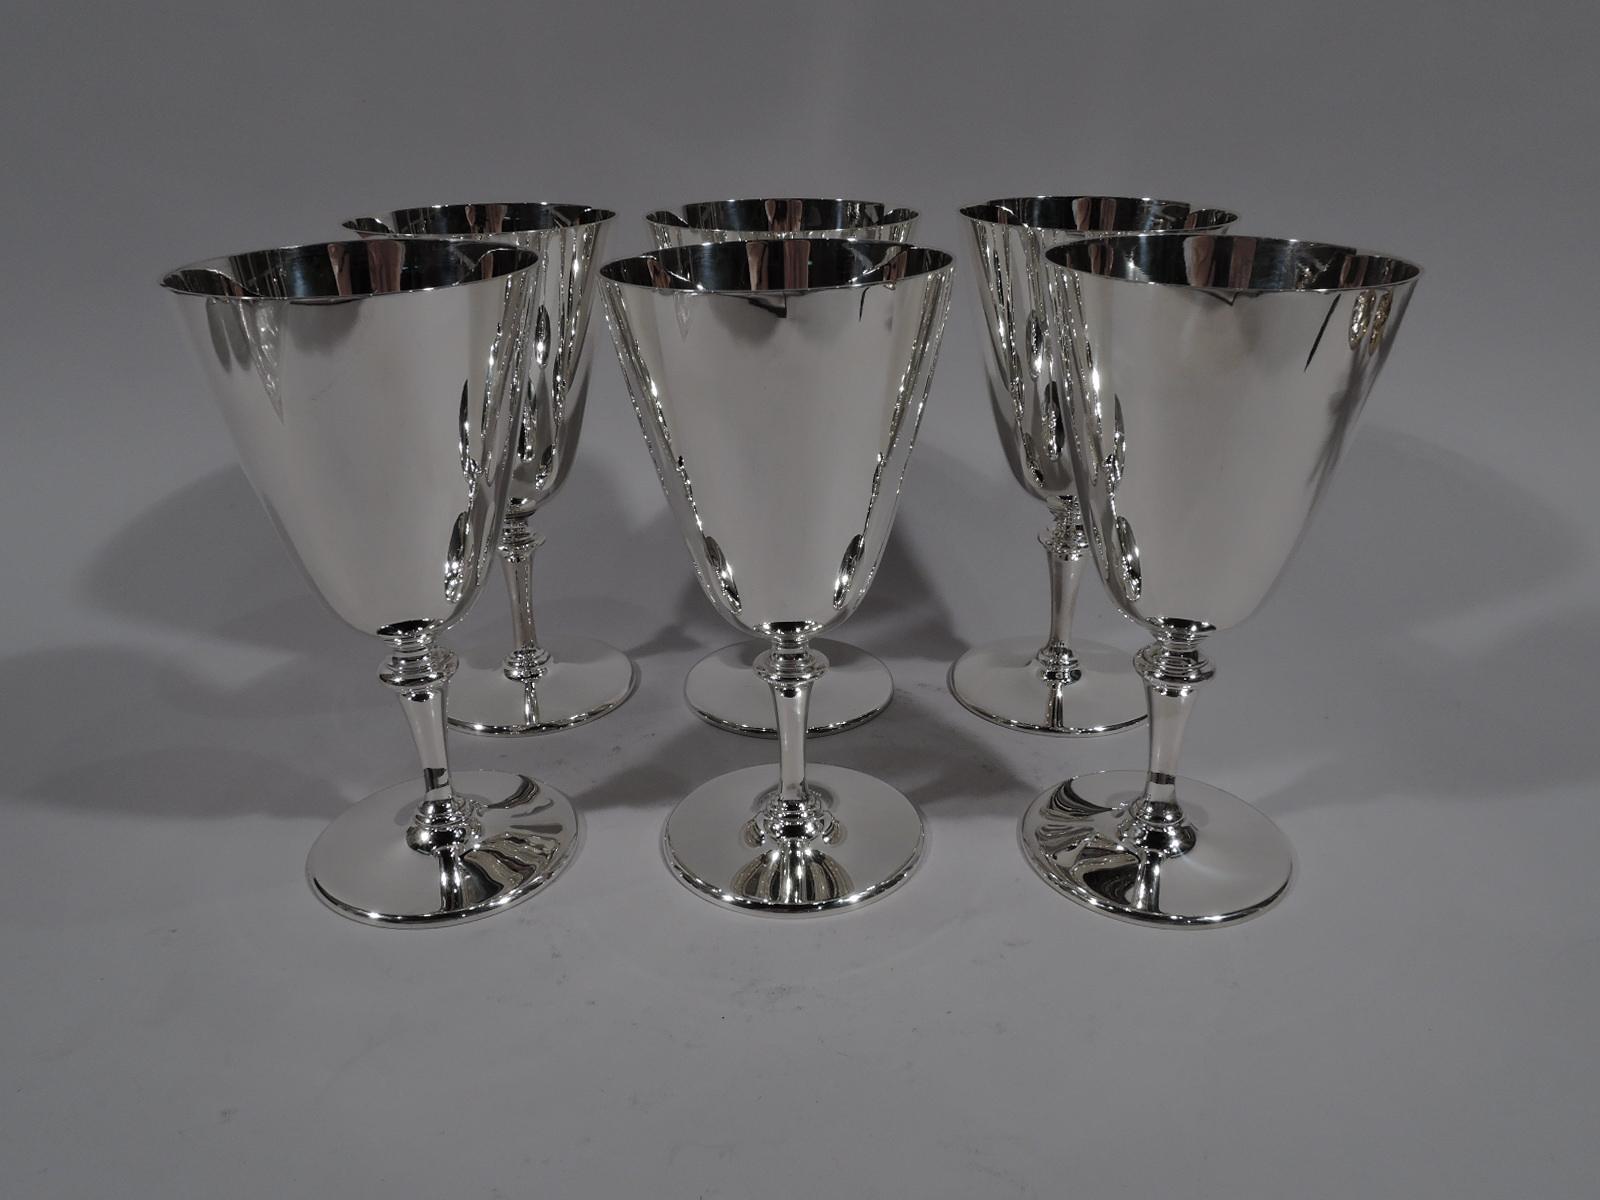 Set of 6 modern sterling silver goblets. Made by Tiffany & Co. in New York. Each: Conical bowl with knopped tapering stem and flat circular foot. Easy grip with nice balance. Fully marked including pattern no. 20168. Five goblets have director’s